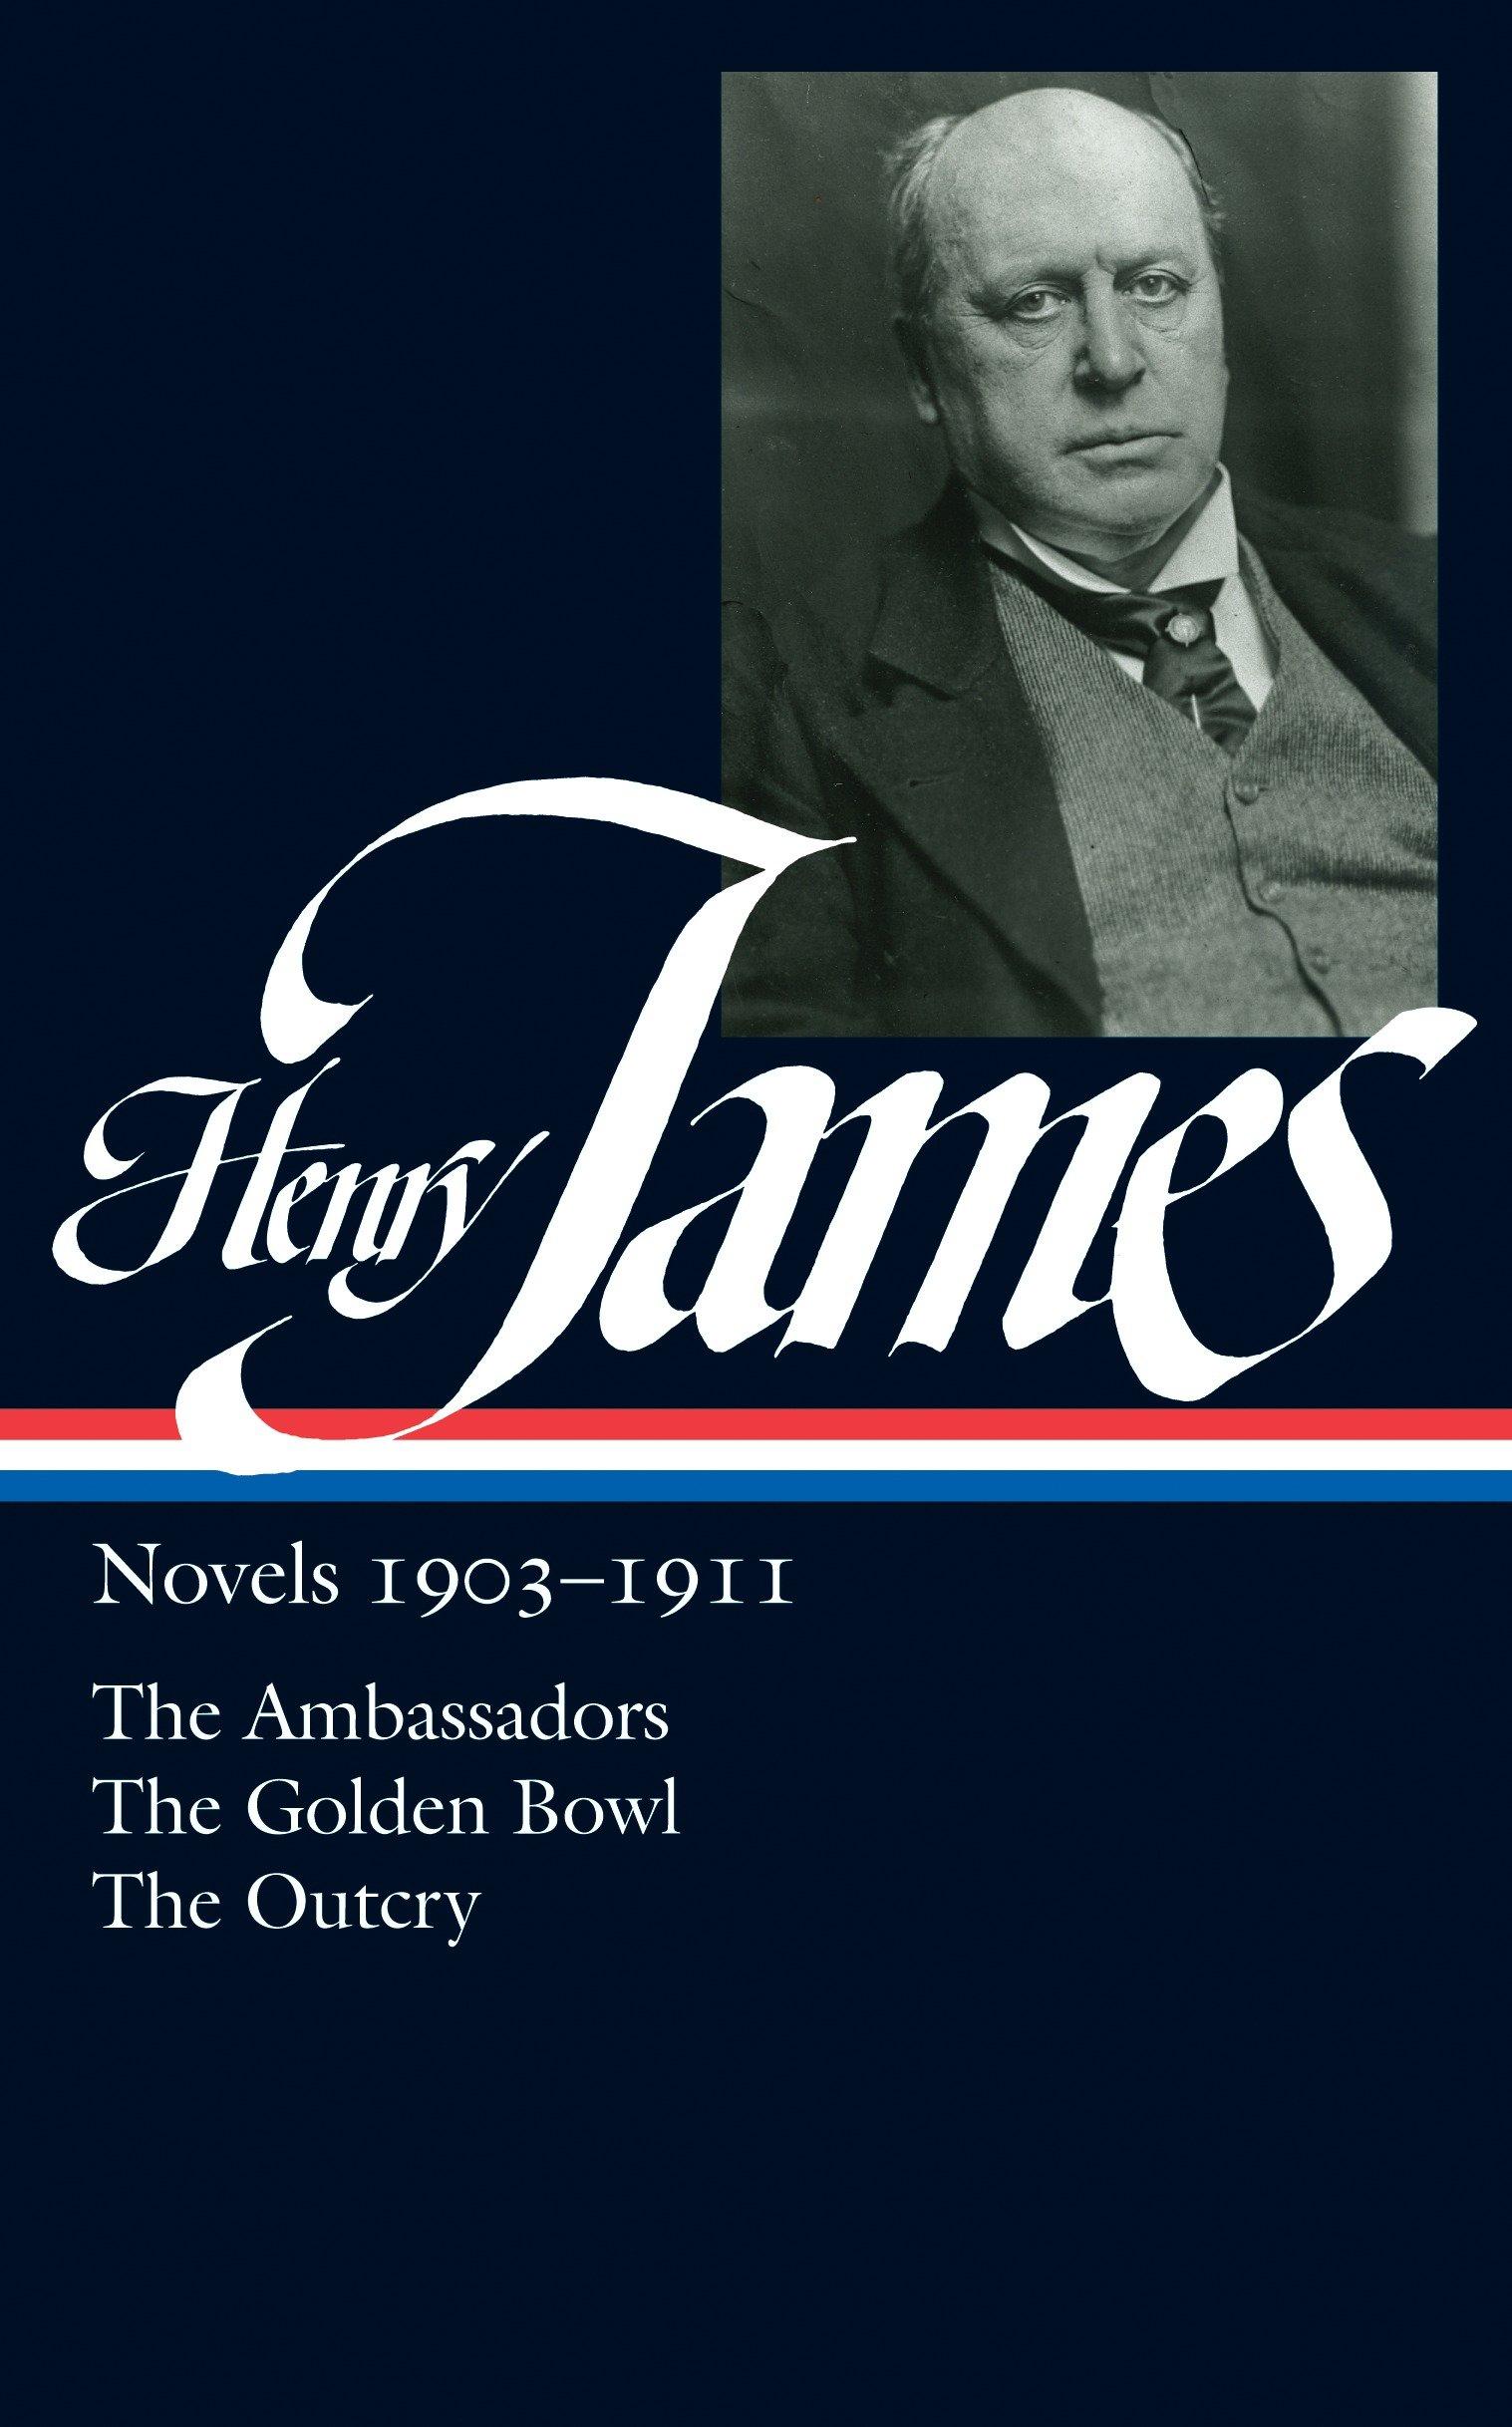 Henry James: Novels 1903-1911 (LOA #215) / The Ambassadors / The Golden Bowl / The Outcry / Henry James / Buch / Einband - fest (Hardcover) / Englisch / 2011 / The Library of America - James, Henry